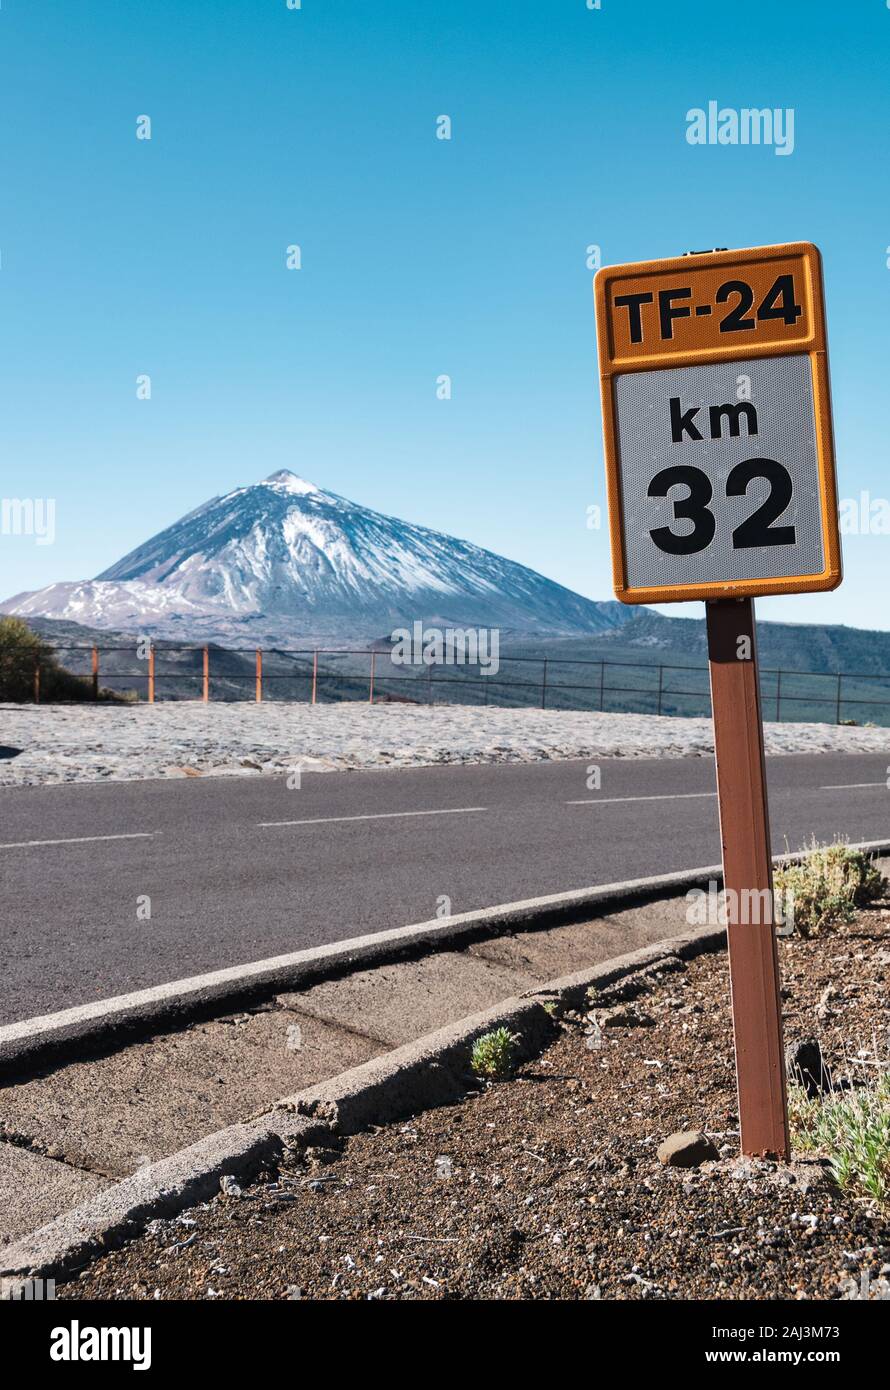 Tenerife,Spain - December 19, 2019: Km 32 of TF-24 road sign in Teide National Park on Tenerife with a parked car and Mount Teide in the background. Stock Photo